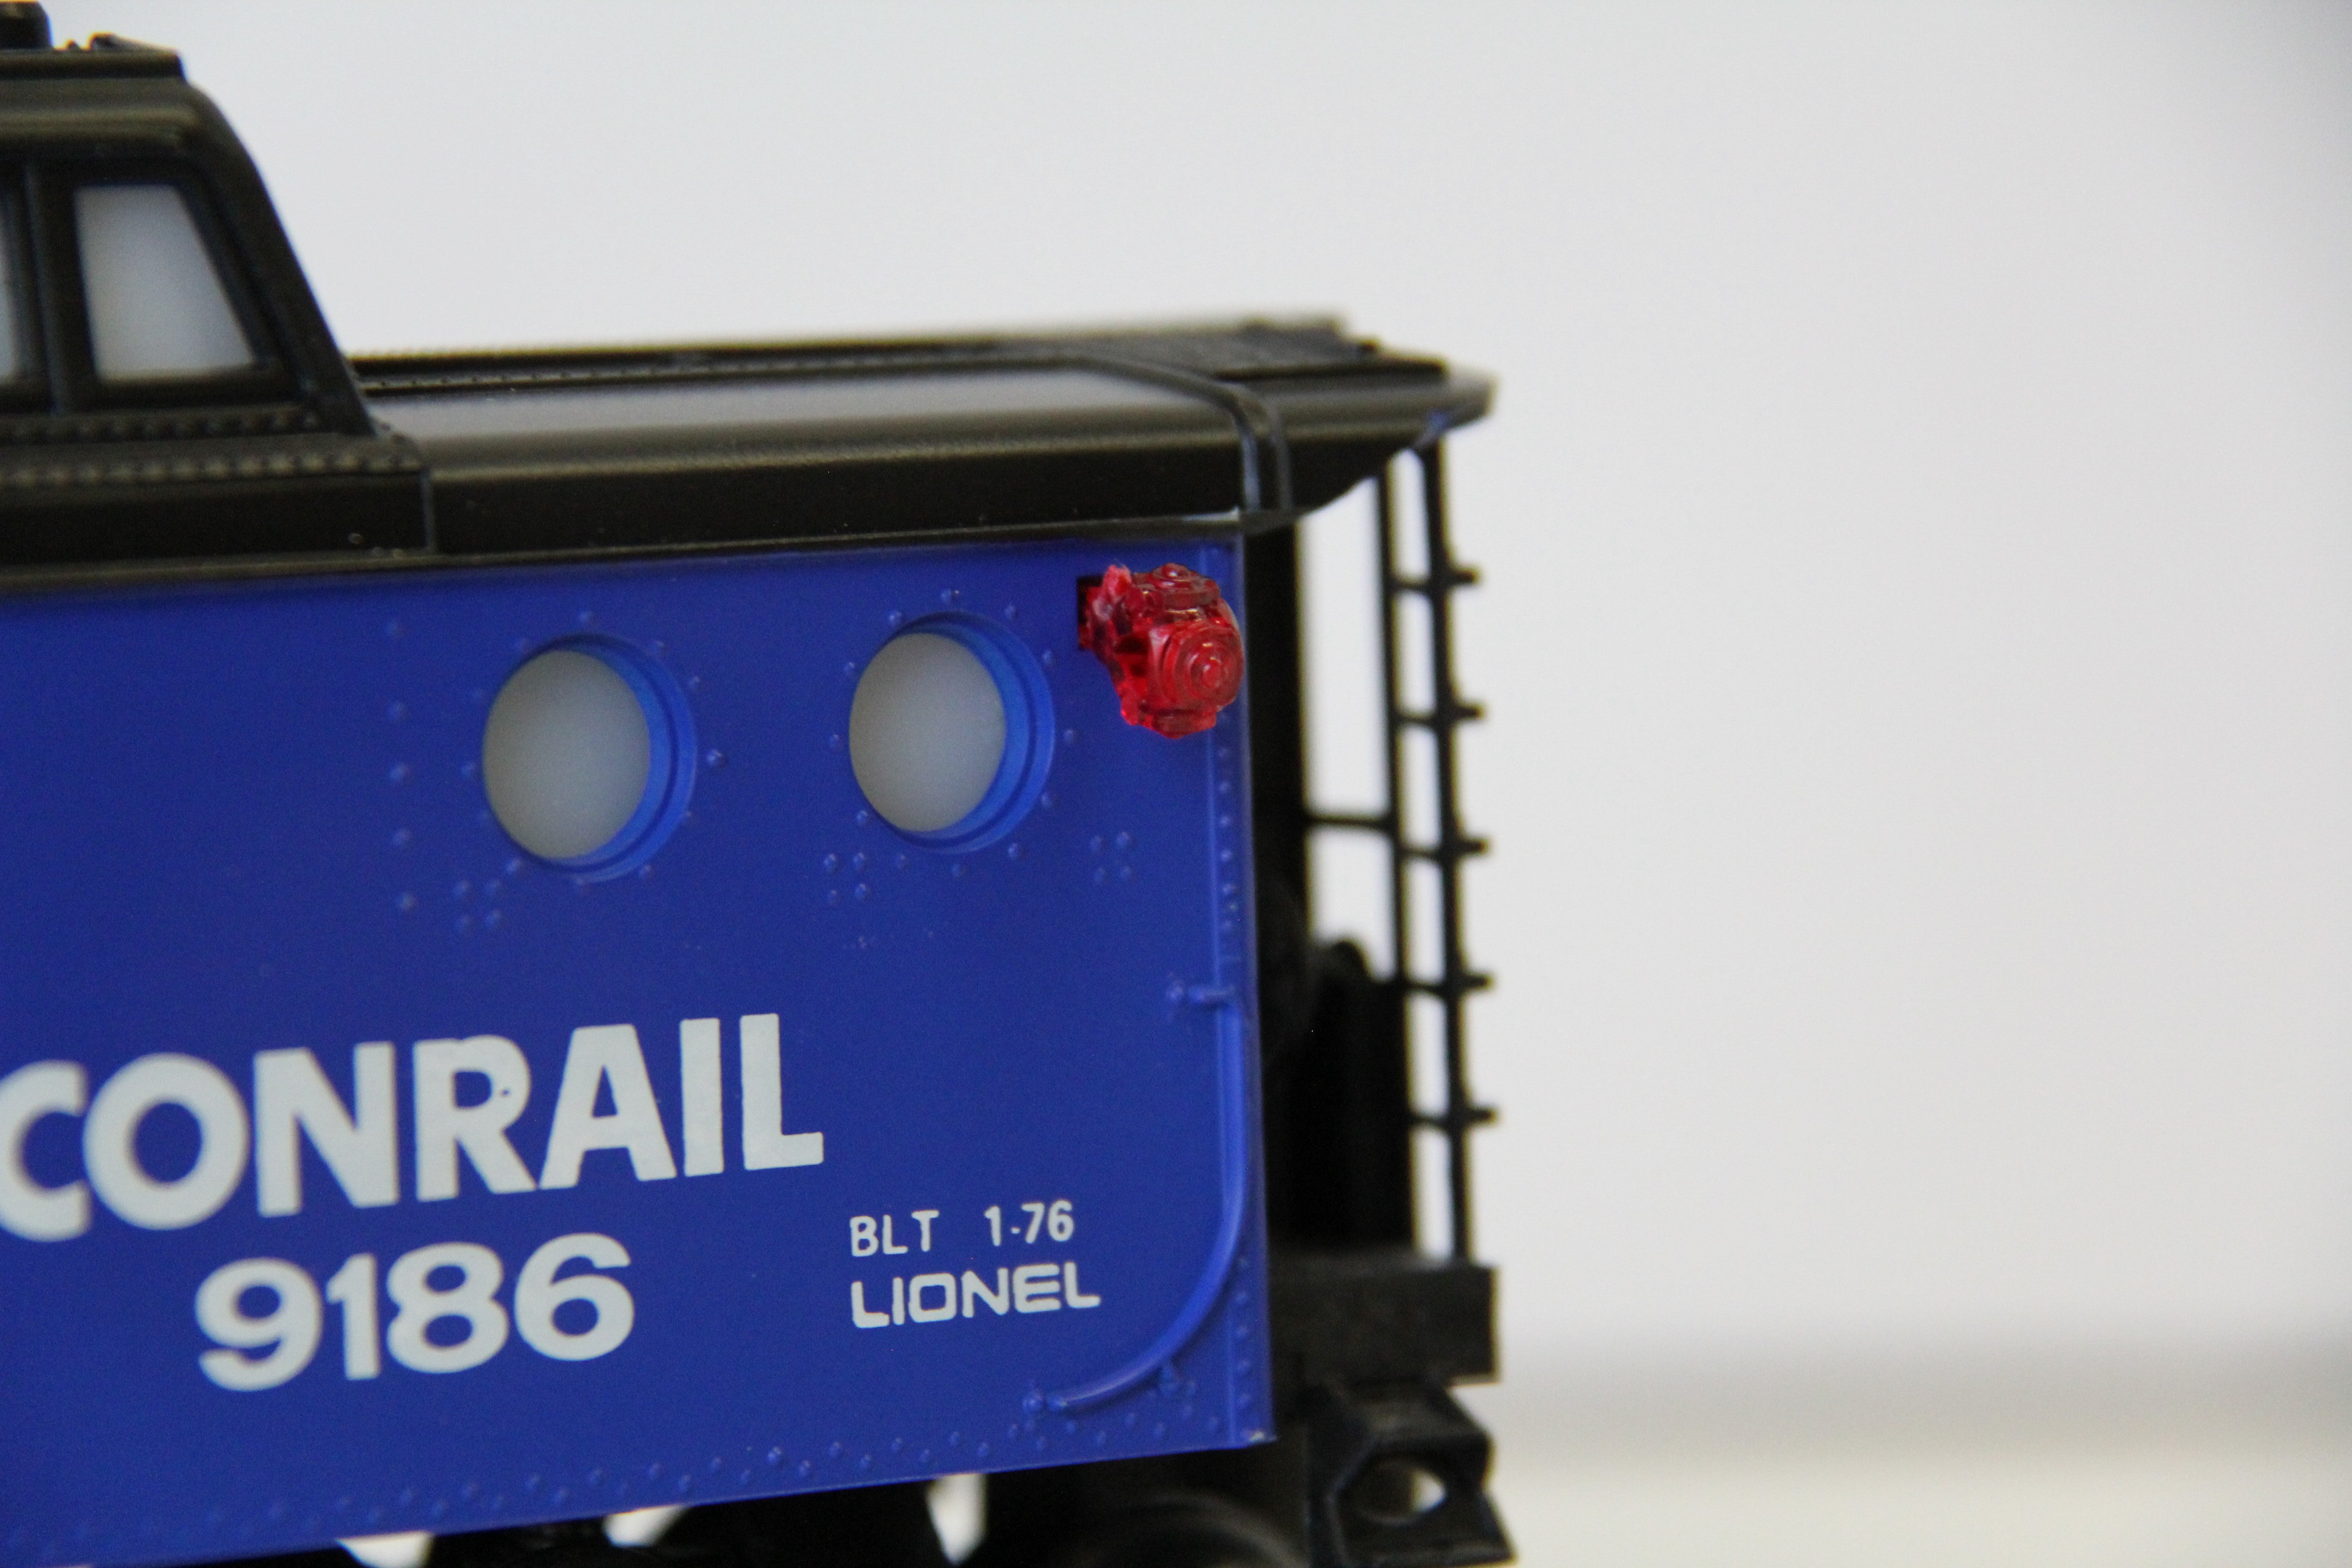 Lionel 6-9186 Conrail Lighted Caboose-Second hand-M4488